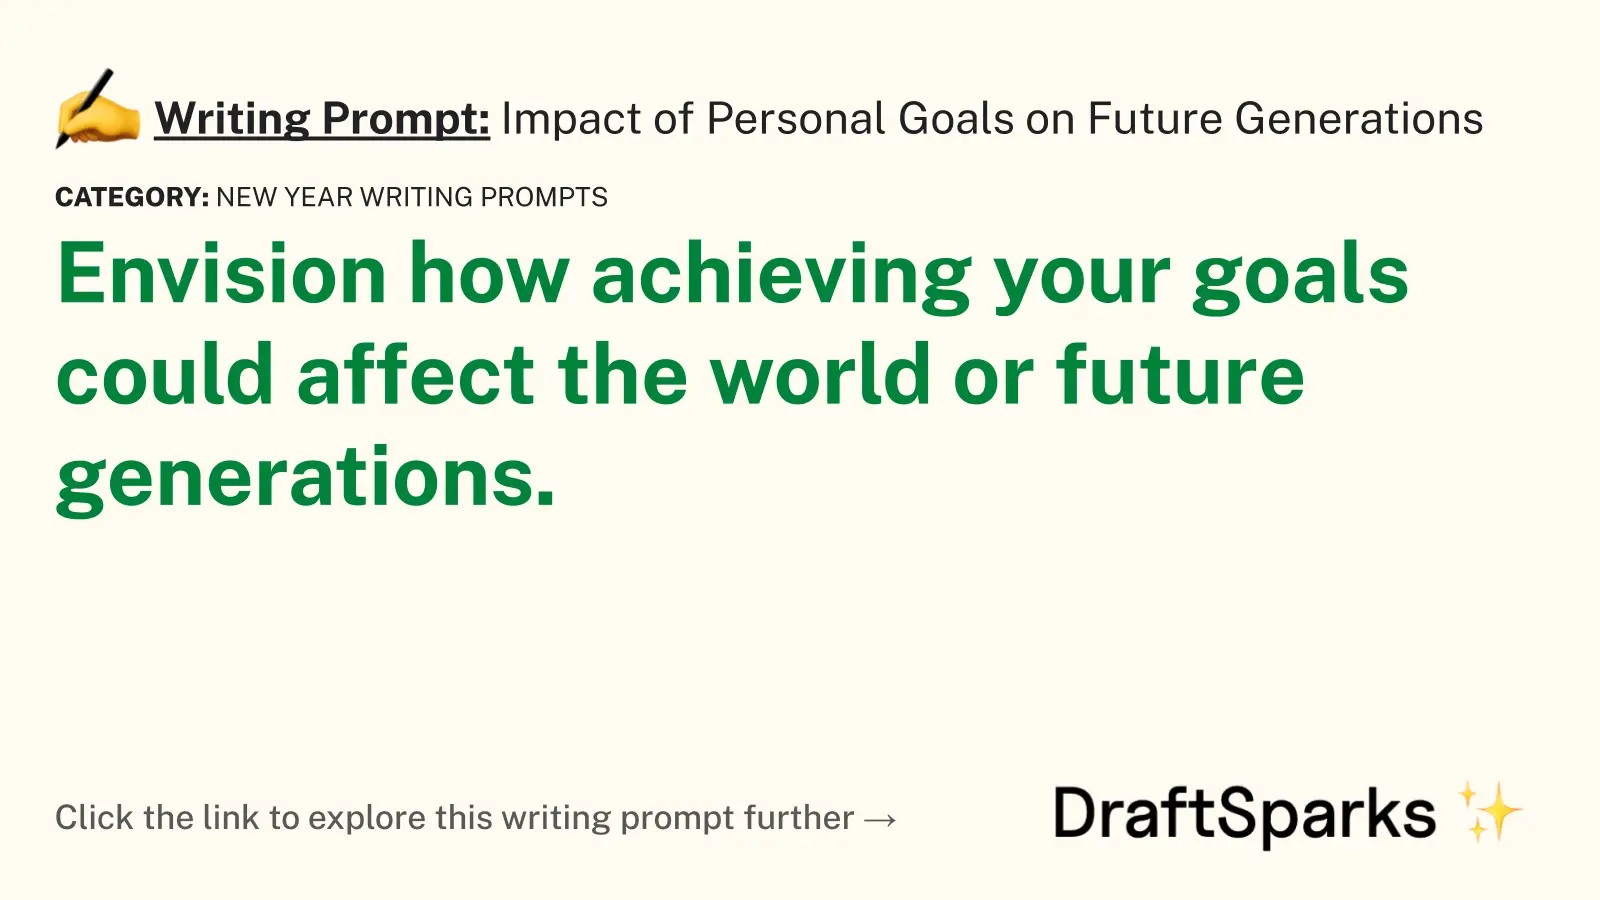 Impact of Personal Goals on Future Generations